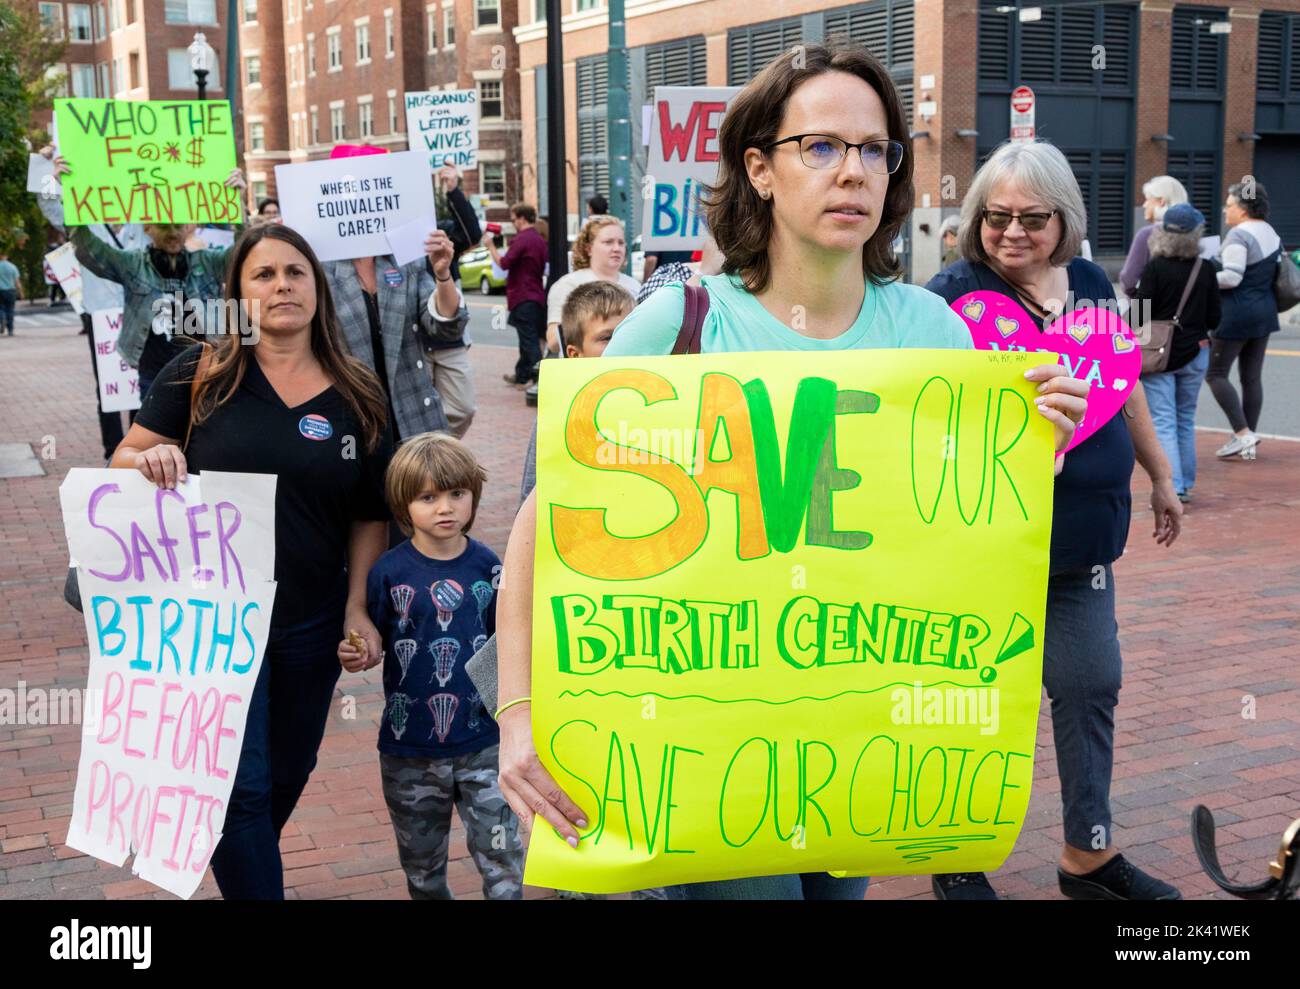 Sept. 28, 2022. Cambridge, MA. Community activists, union organizers and maternal health advocates rallied and marched at Beth Israel Lahey Health Cor Stock Photo